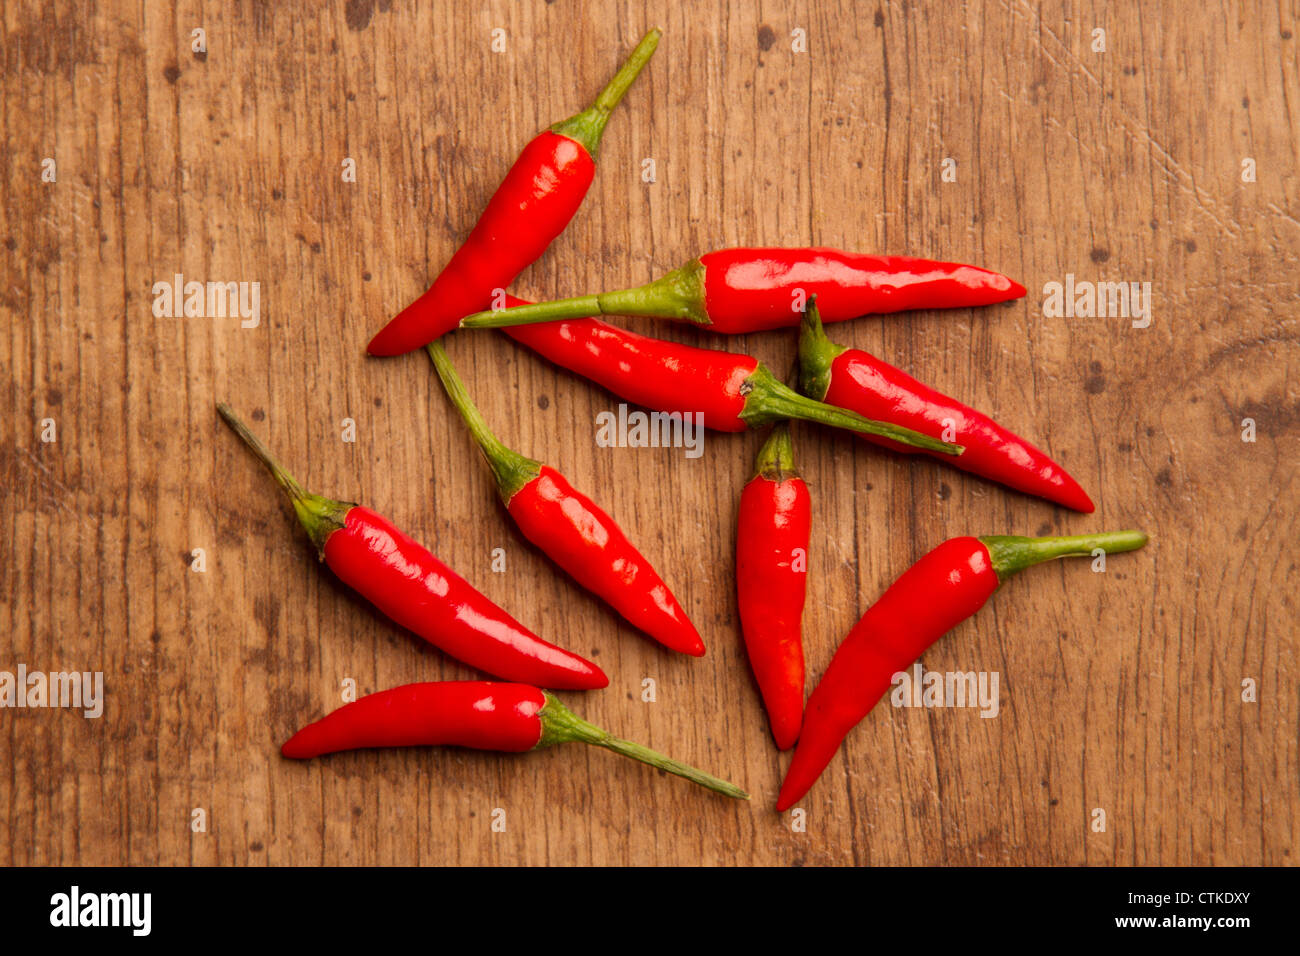 A handful of red chillis placed on a wooden floor Stock Photo